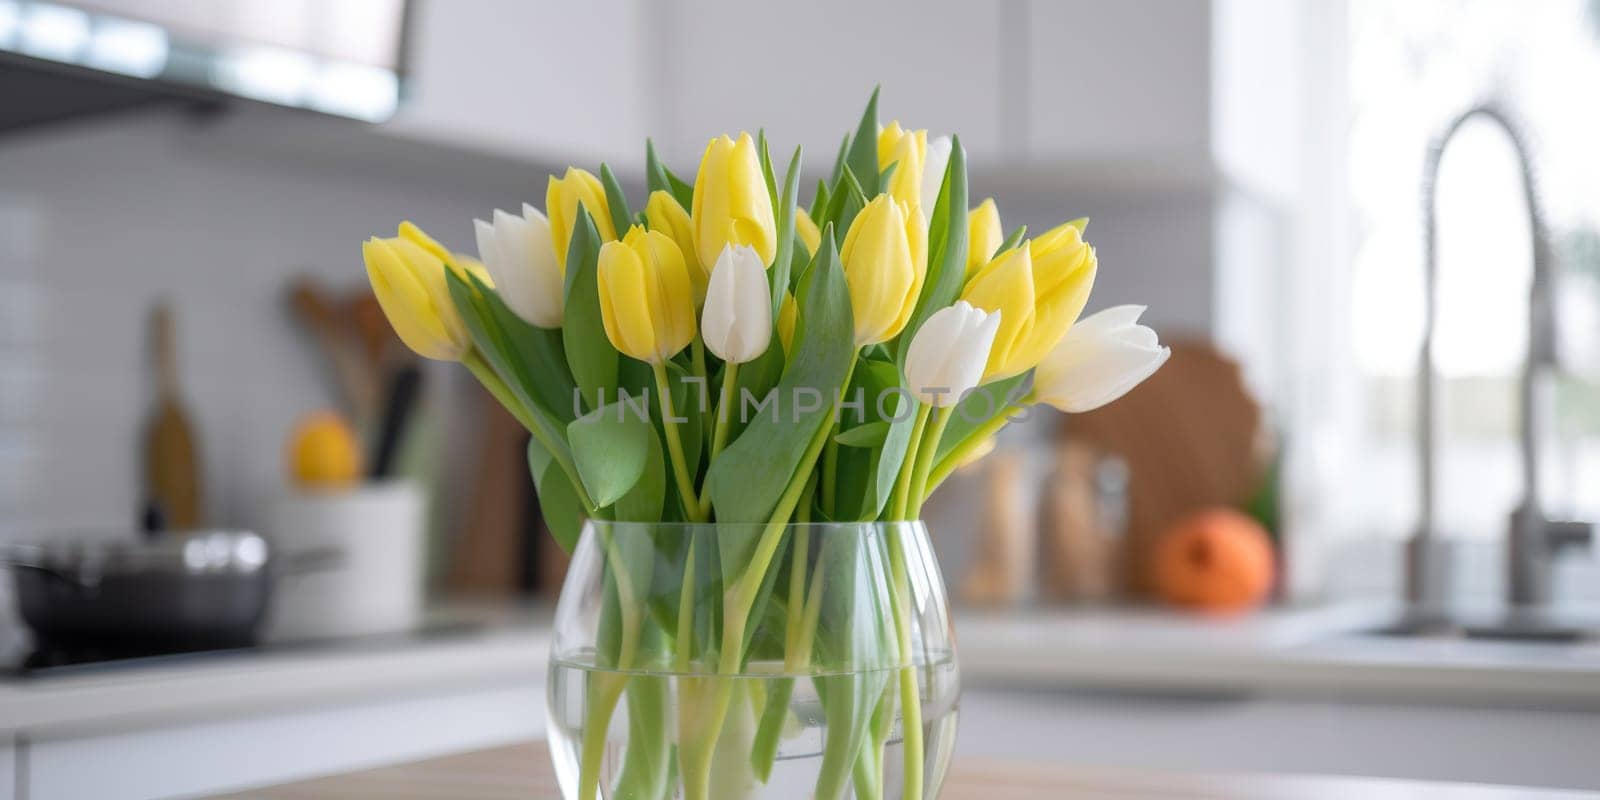 Lovely Bunch Of Fresh White And Yellow Tulips On A Kitchen Table